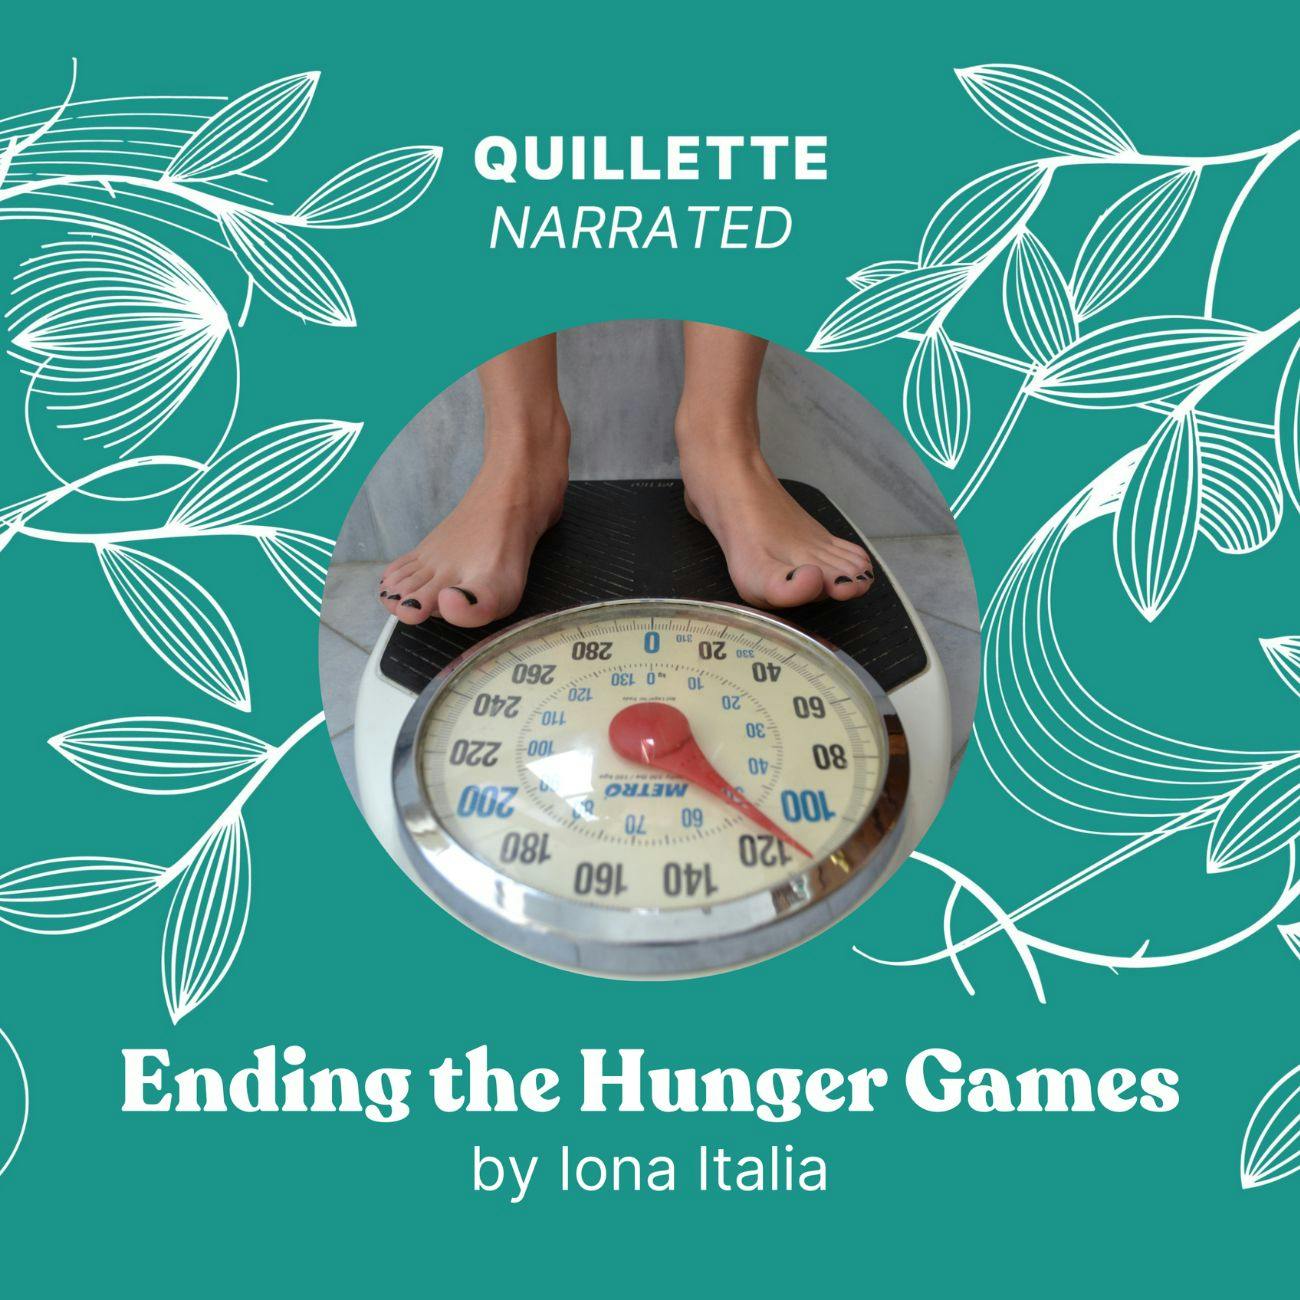 ’Ending the Hunger Games’ by Iona Italia